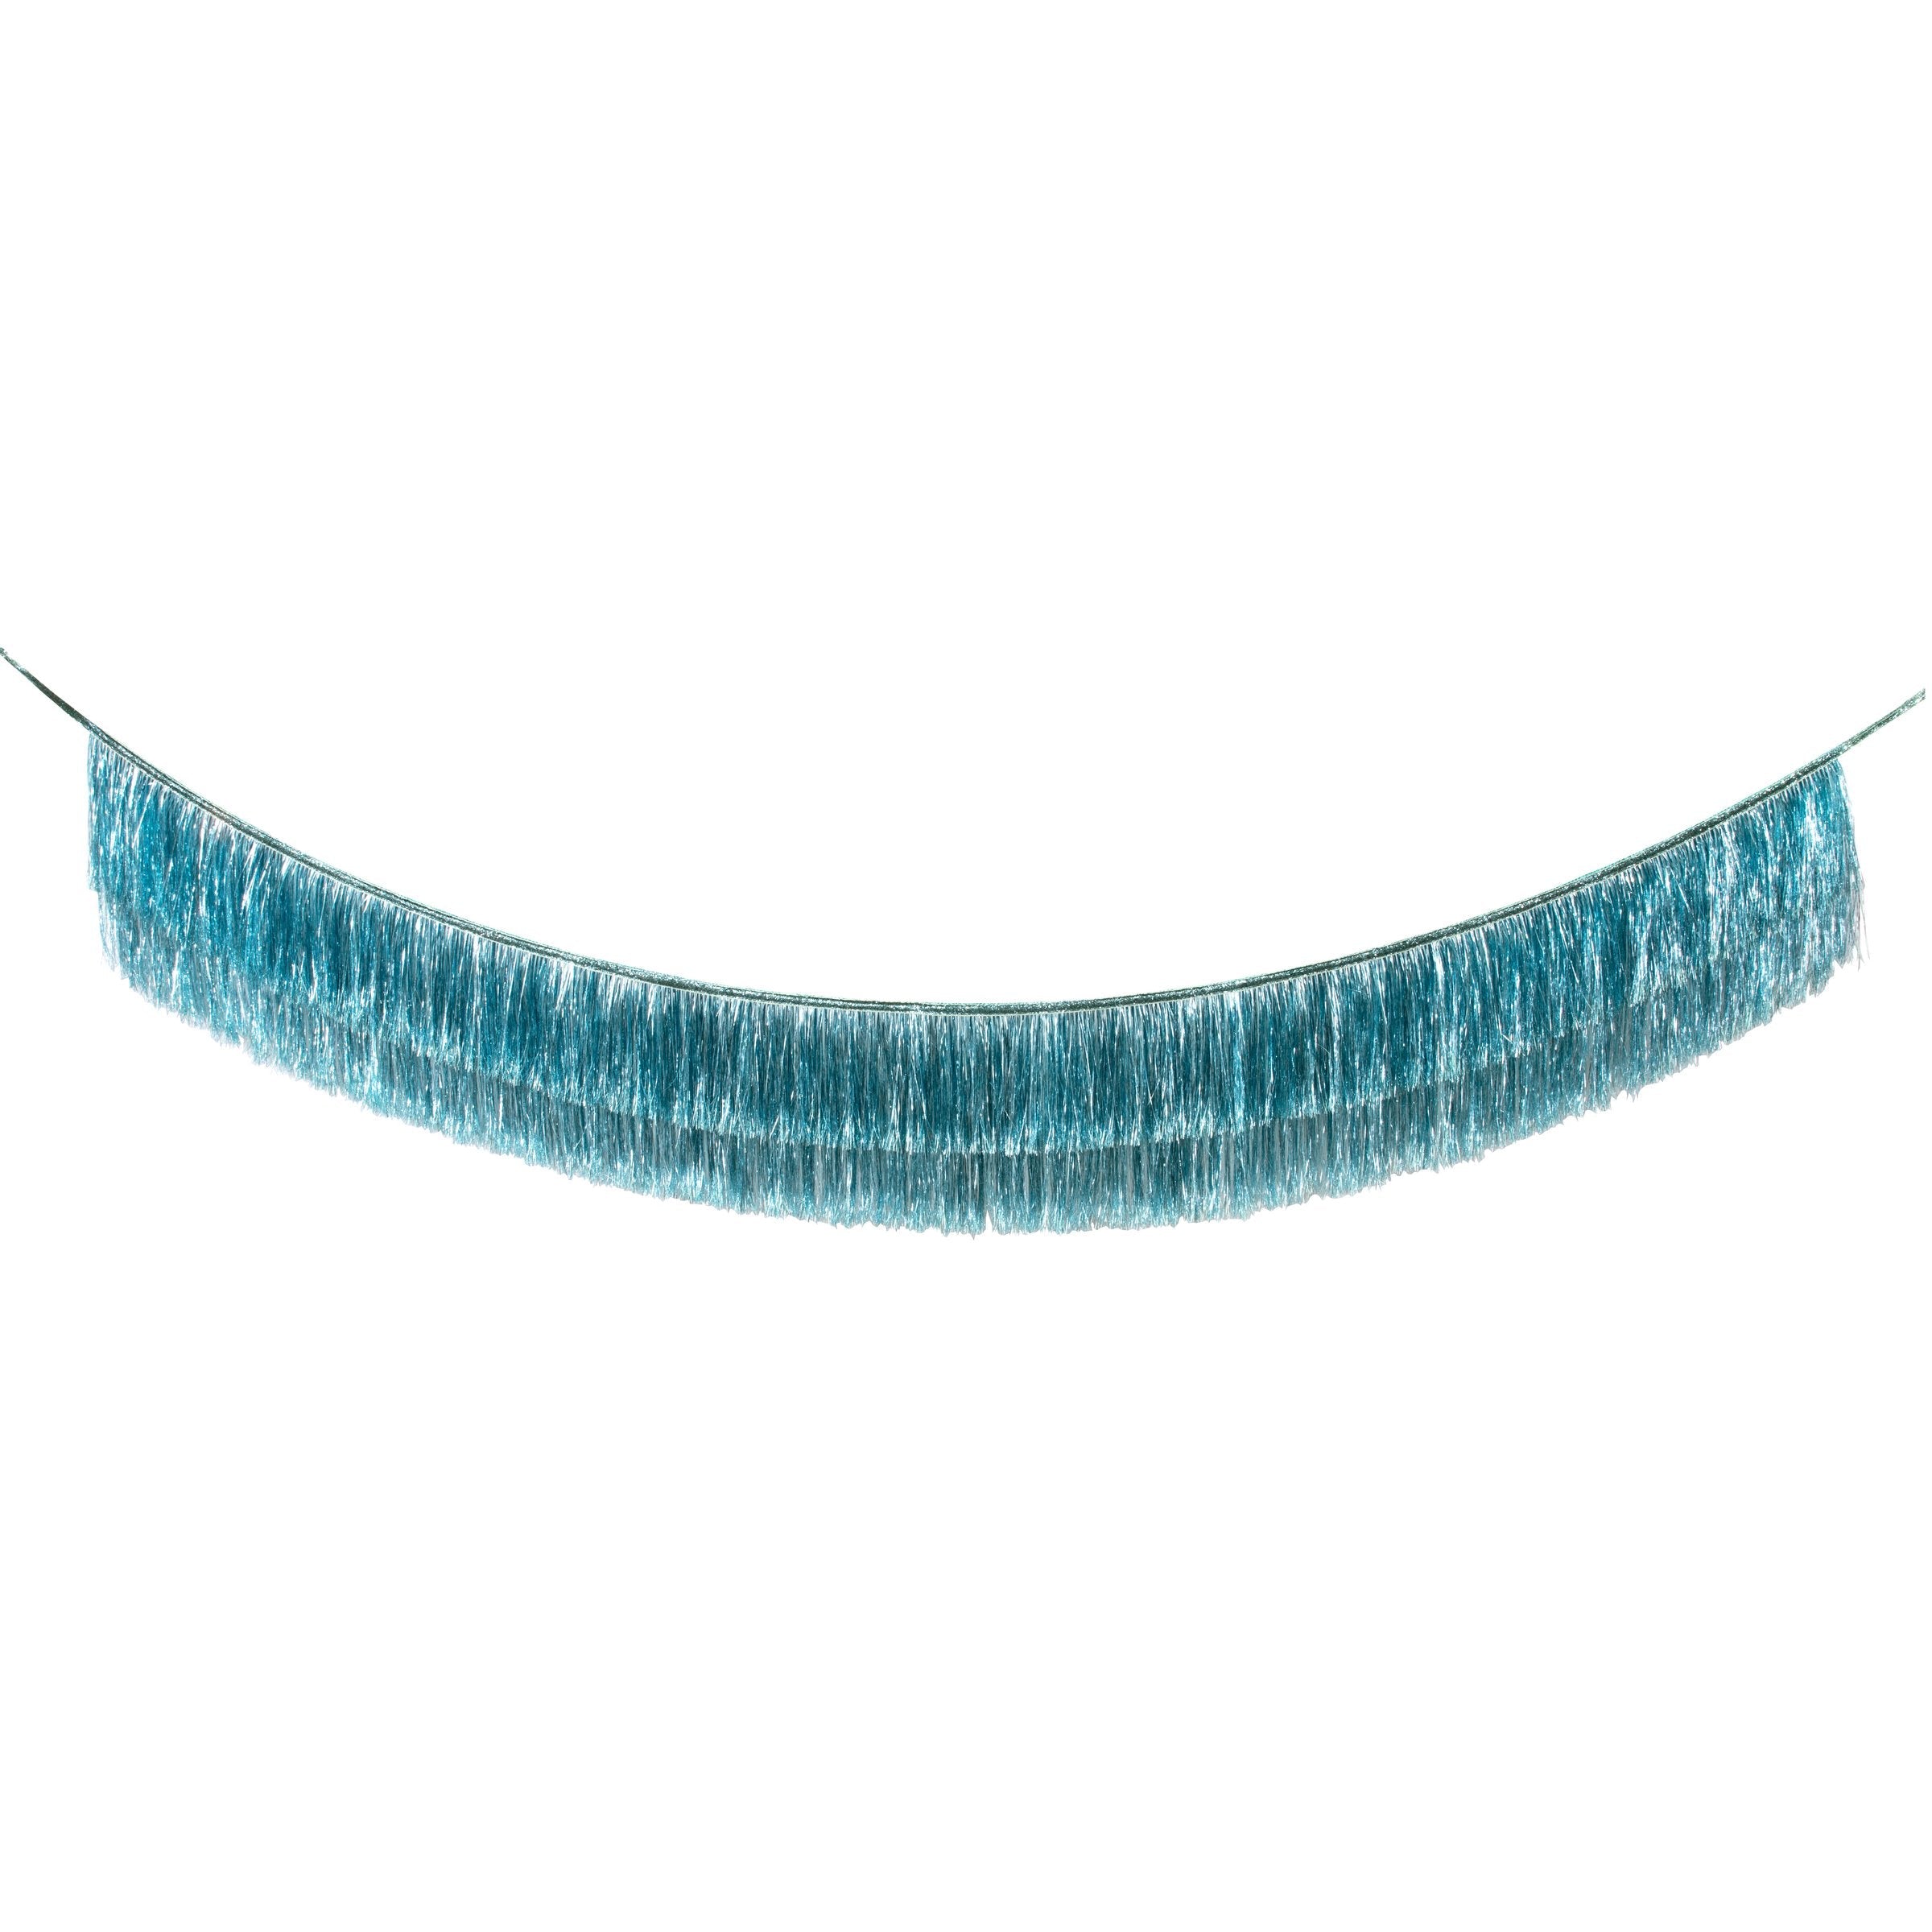 Our long tinsel garland is perfect to add a touch of shimmering blue to any party.